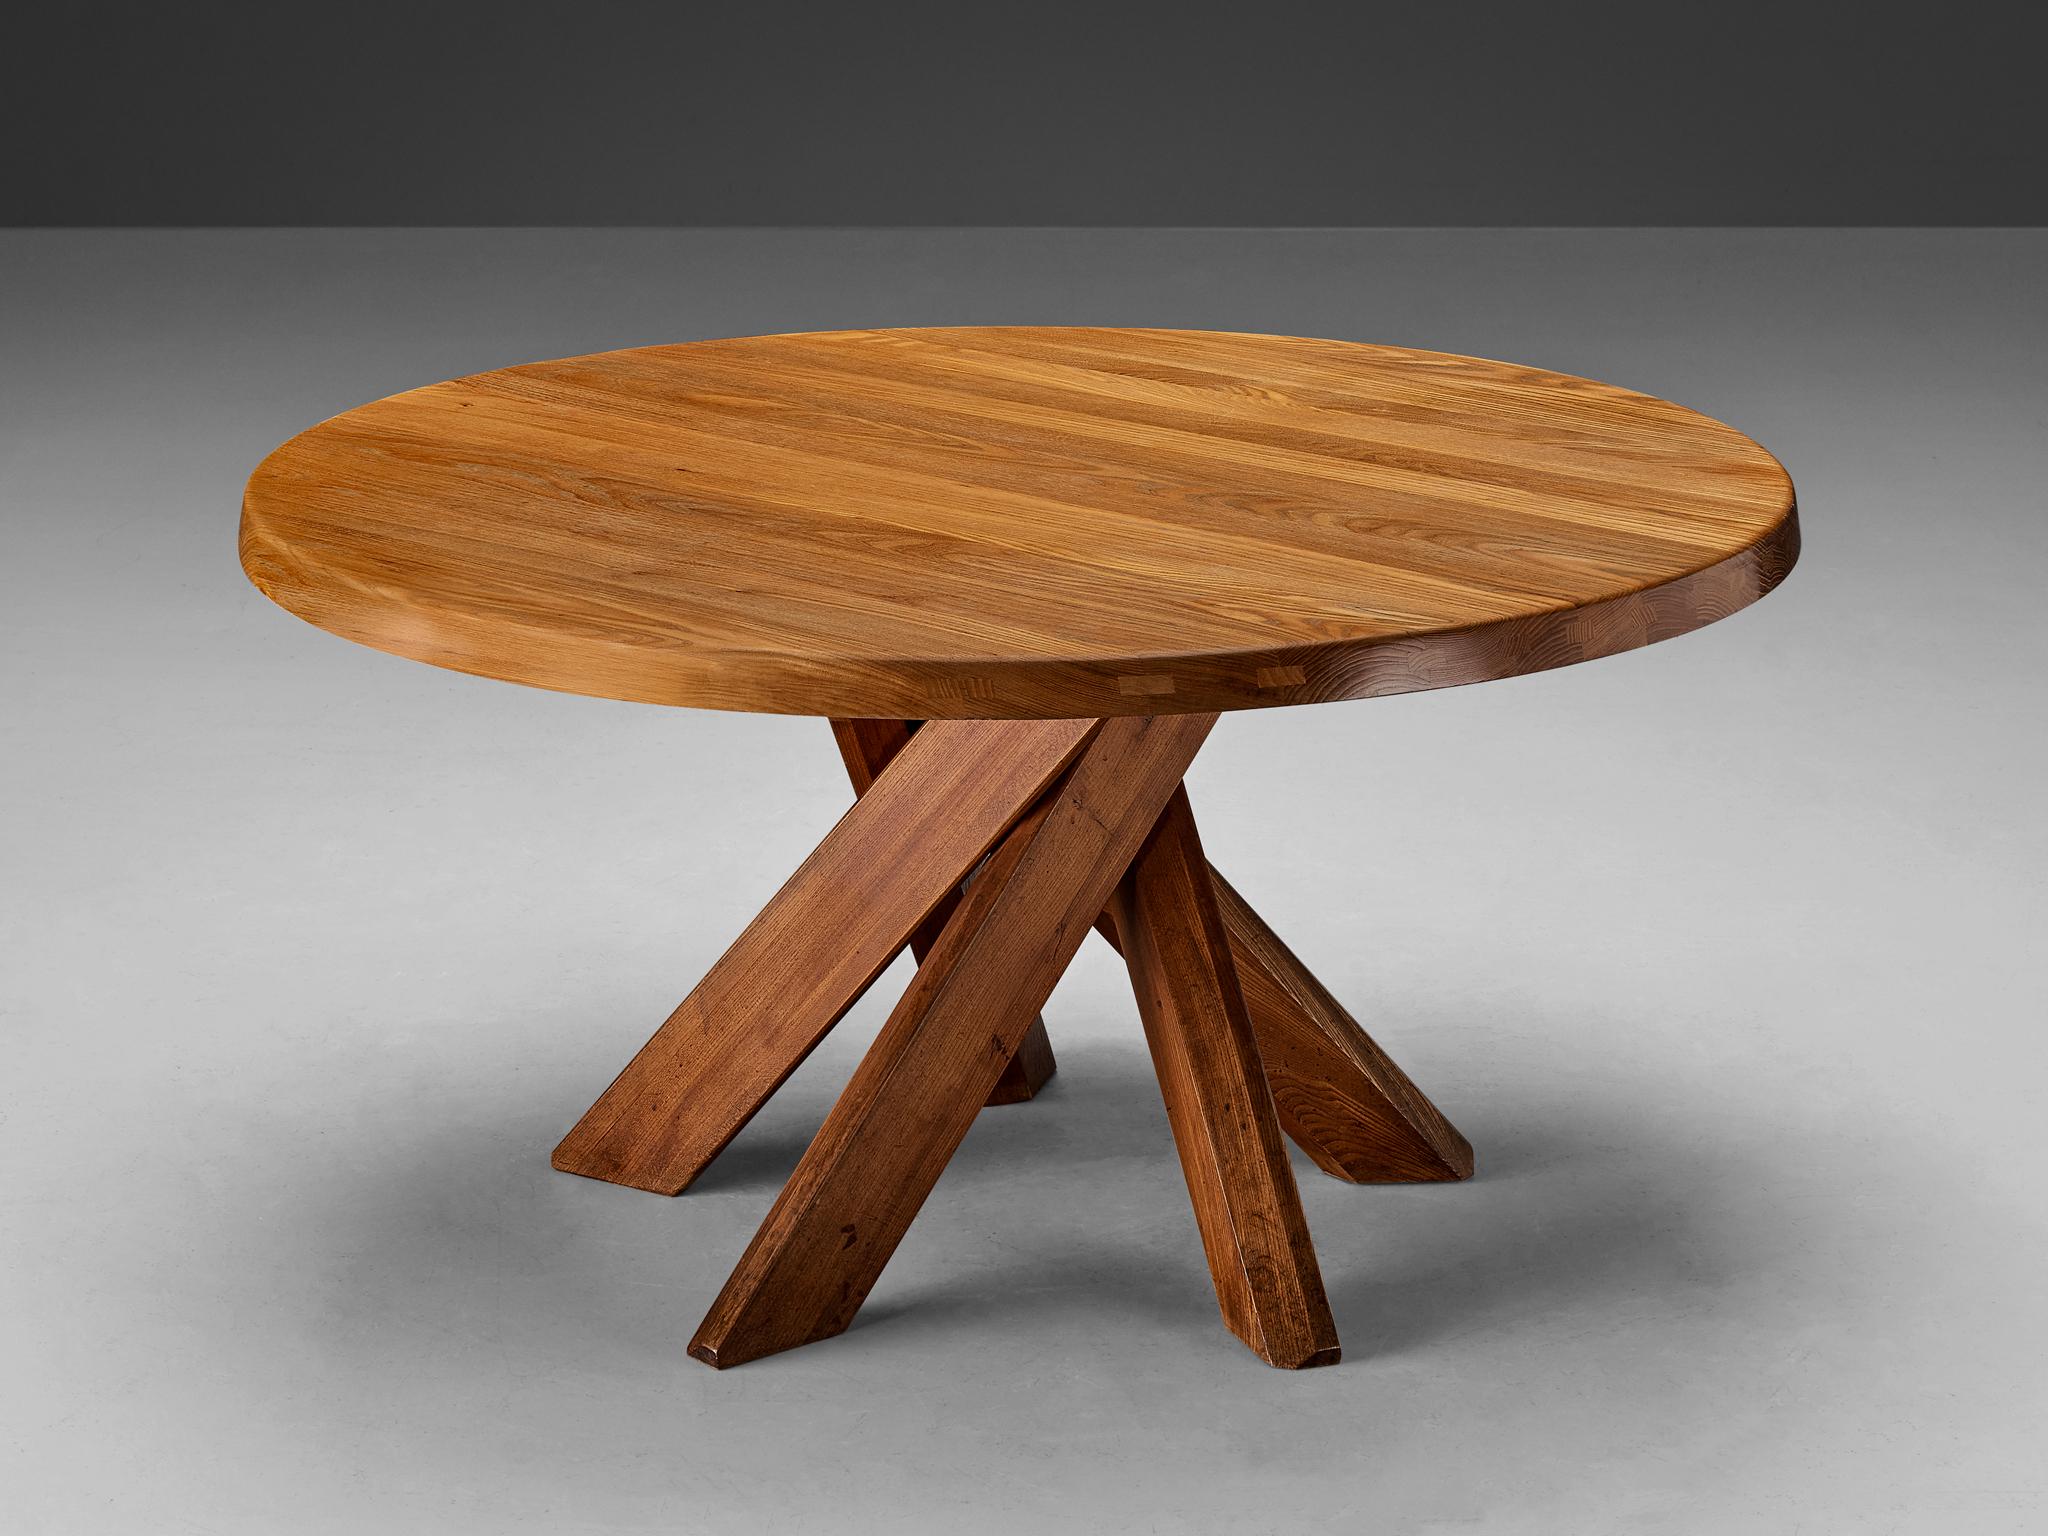 Pierre Chapo, dining table model 'T21 D', elm, France, 1970s

This table is one of the early editions designed by Pierre Chapo, known for his hallmark use of solid elmwood and a commitment to pure and clean design and construction principles. This